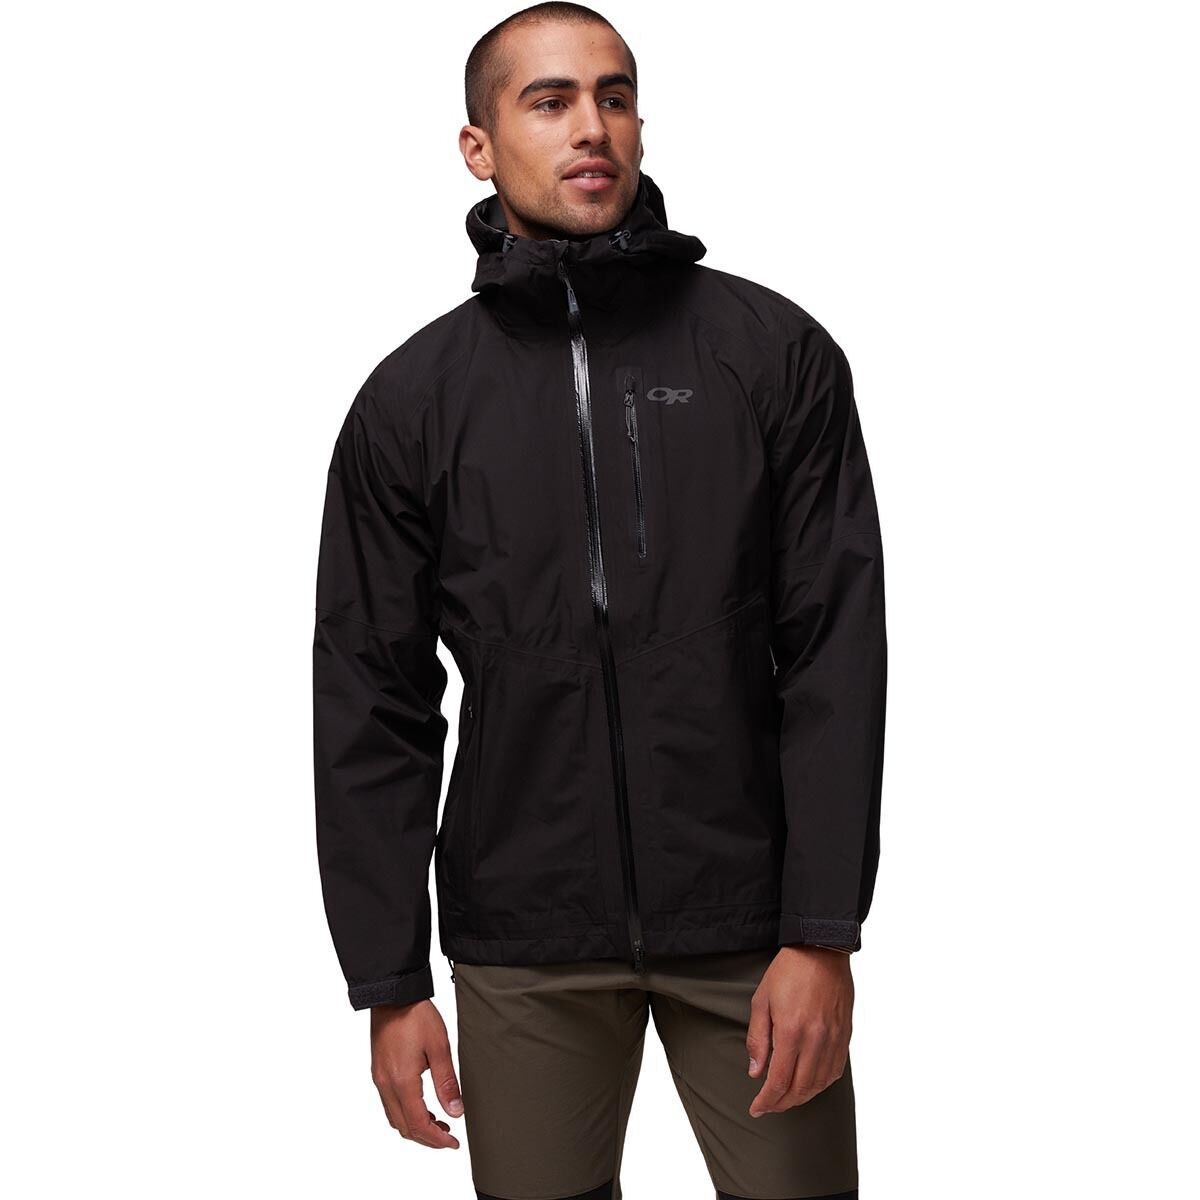 Outdoor Research Foray Jacket - Men's